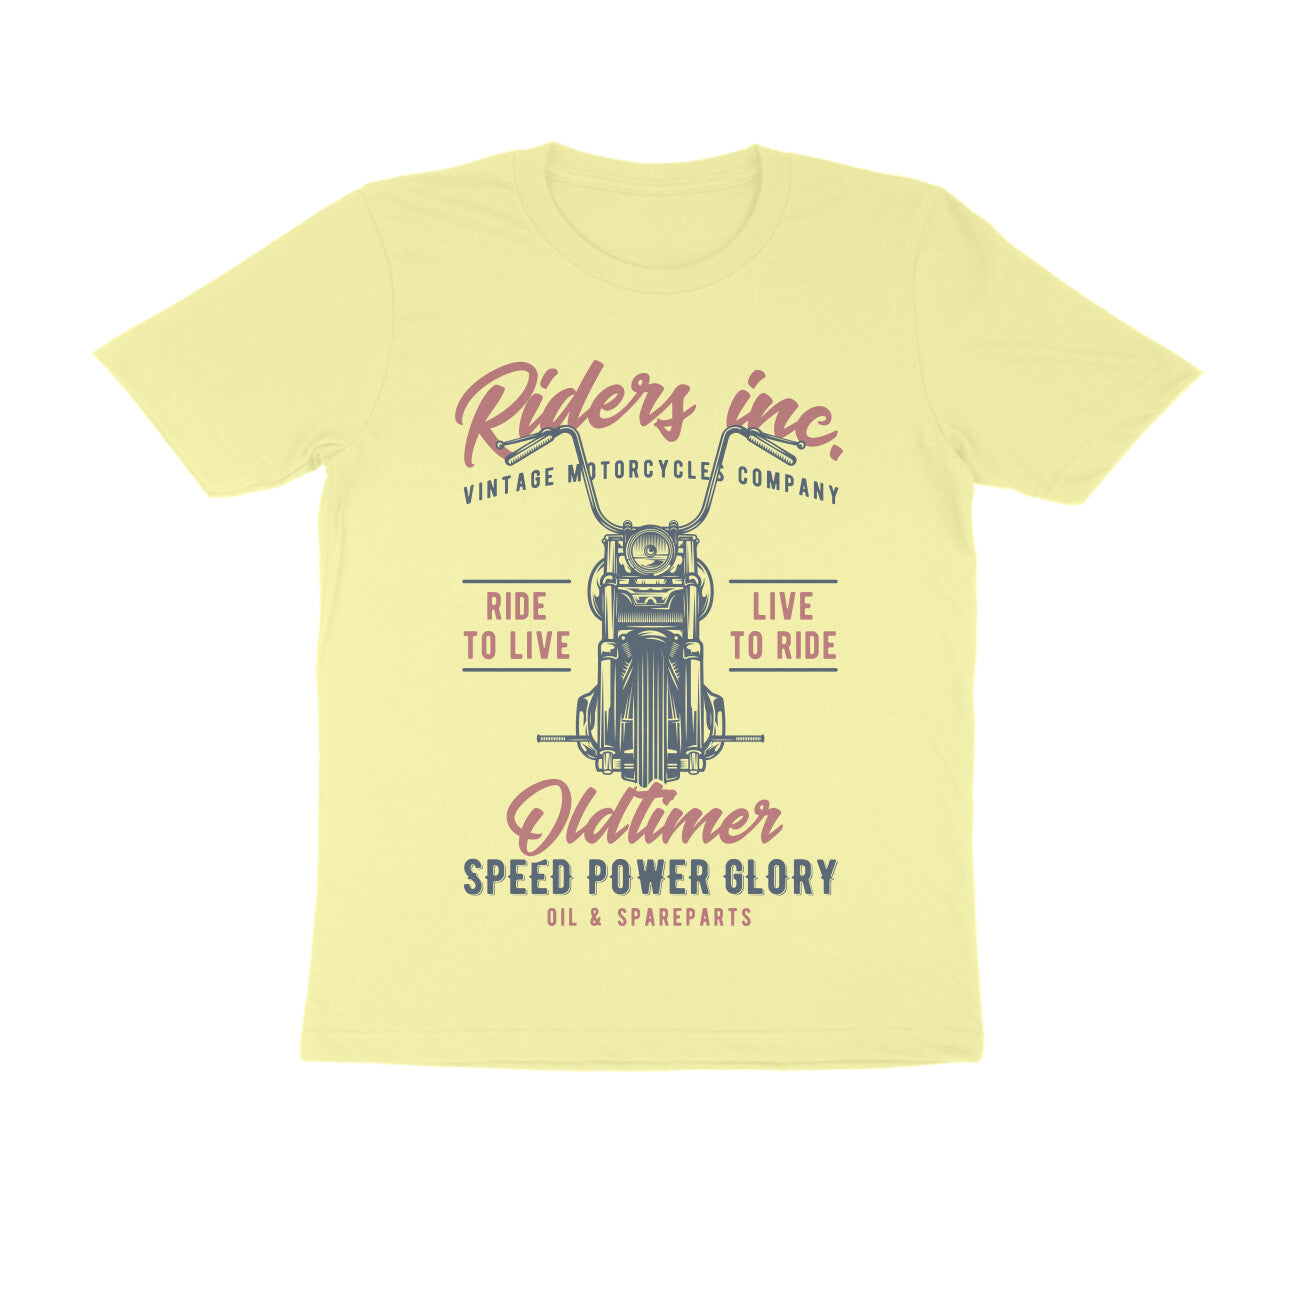 Riders inc. Ride to Live Live to Ride Oldtimer - T-Shirt - Bobber Society